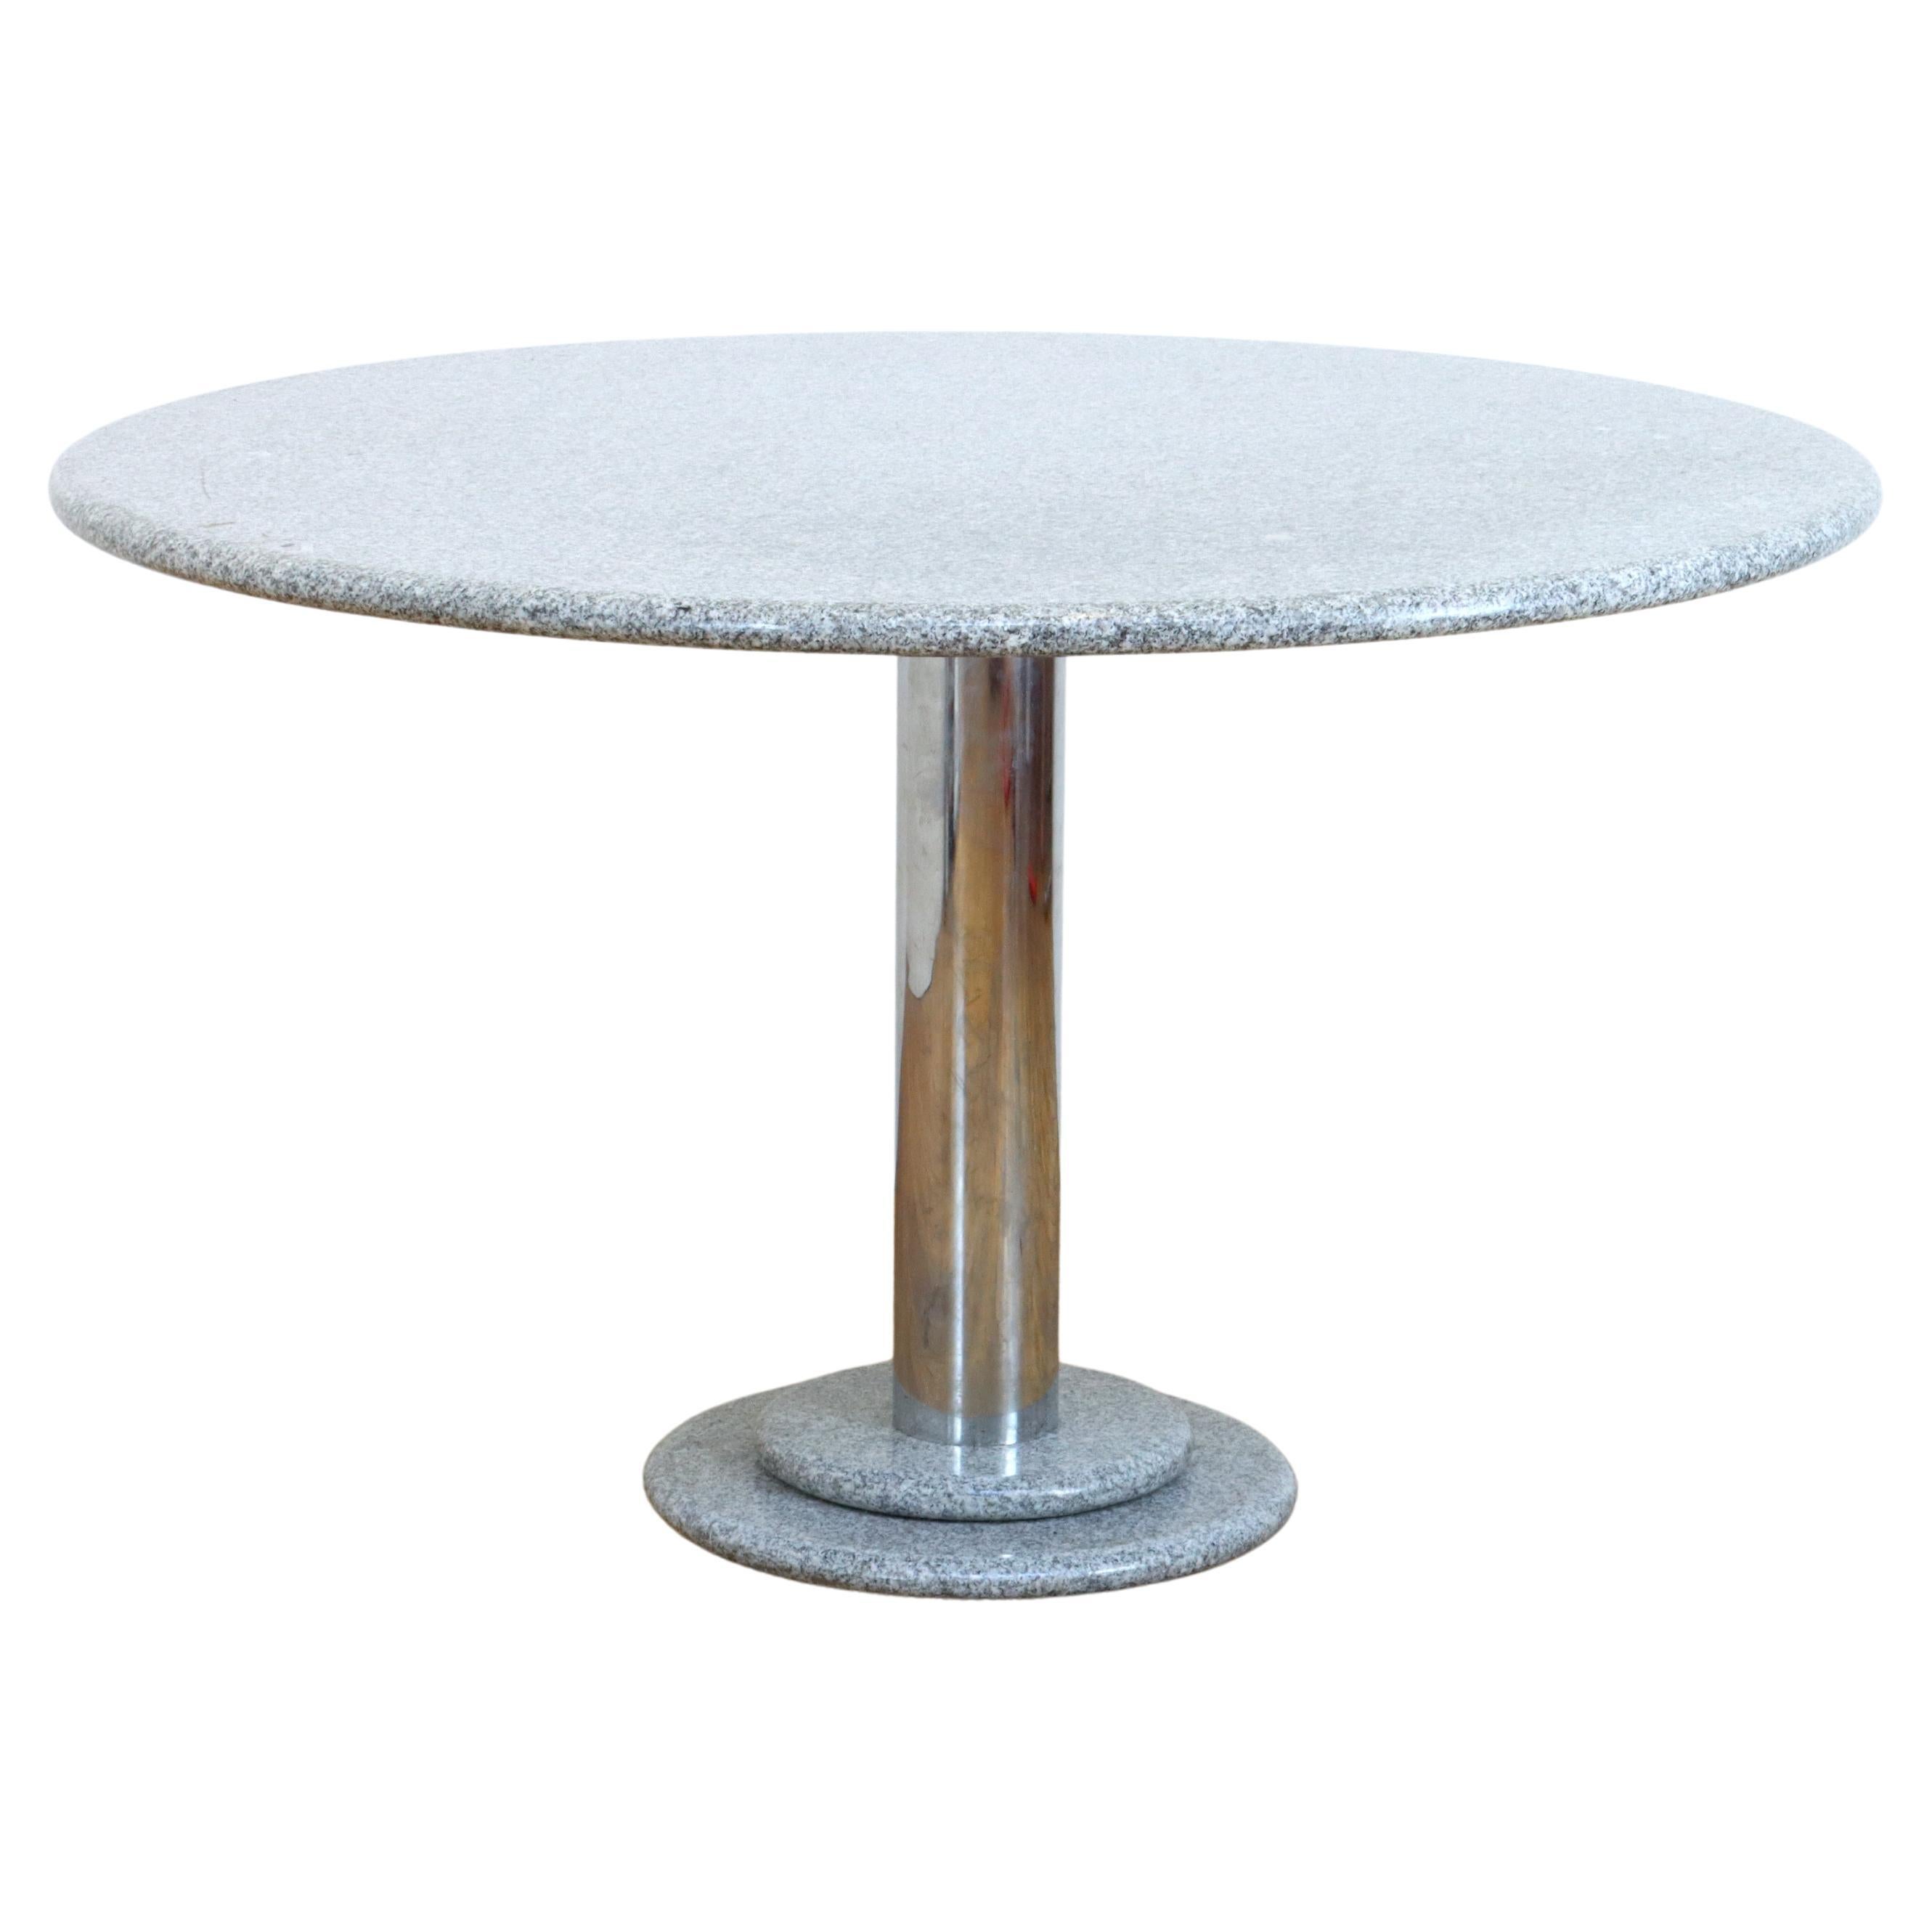 Postmodern Dining Table After Ettore Sotsass   For Sale